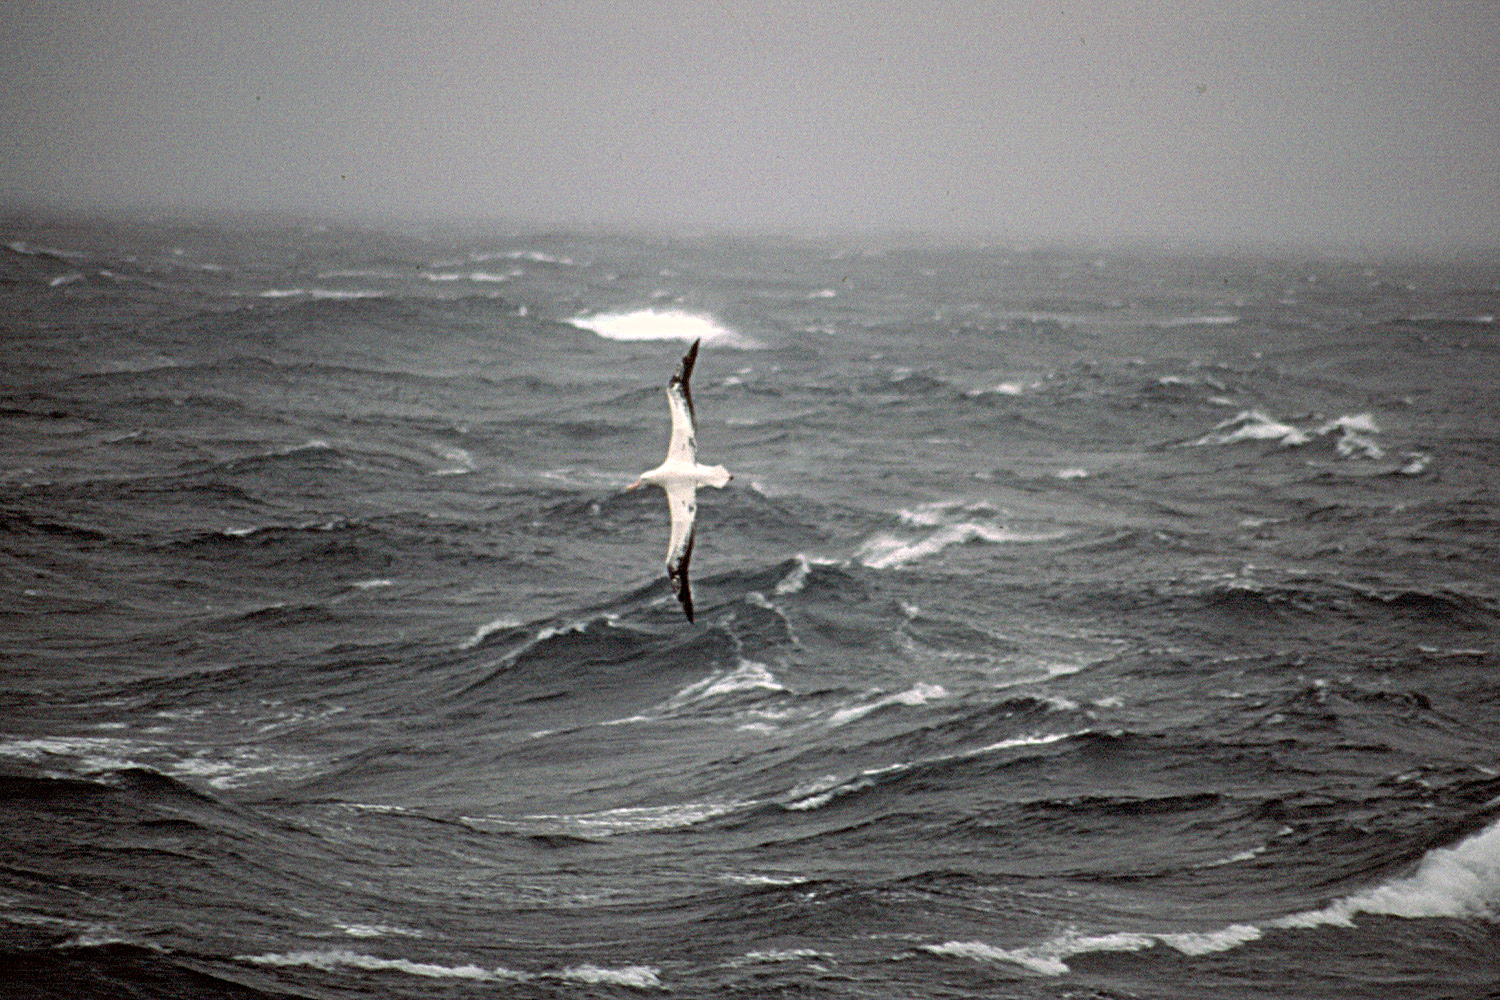 Wandering Albatross - Diomedea exulans - The Bird Which Made the Wind to Blow